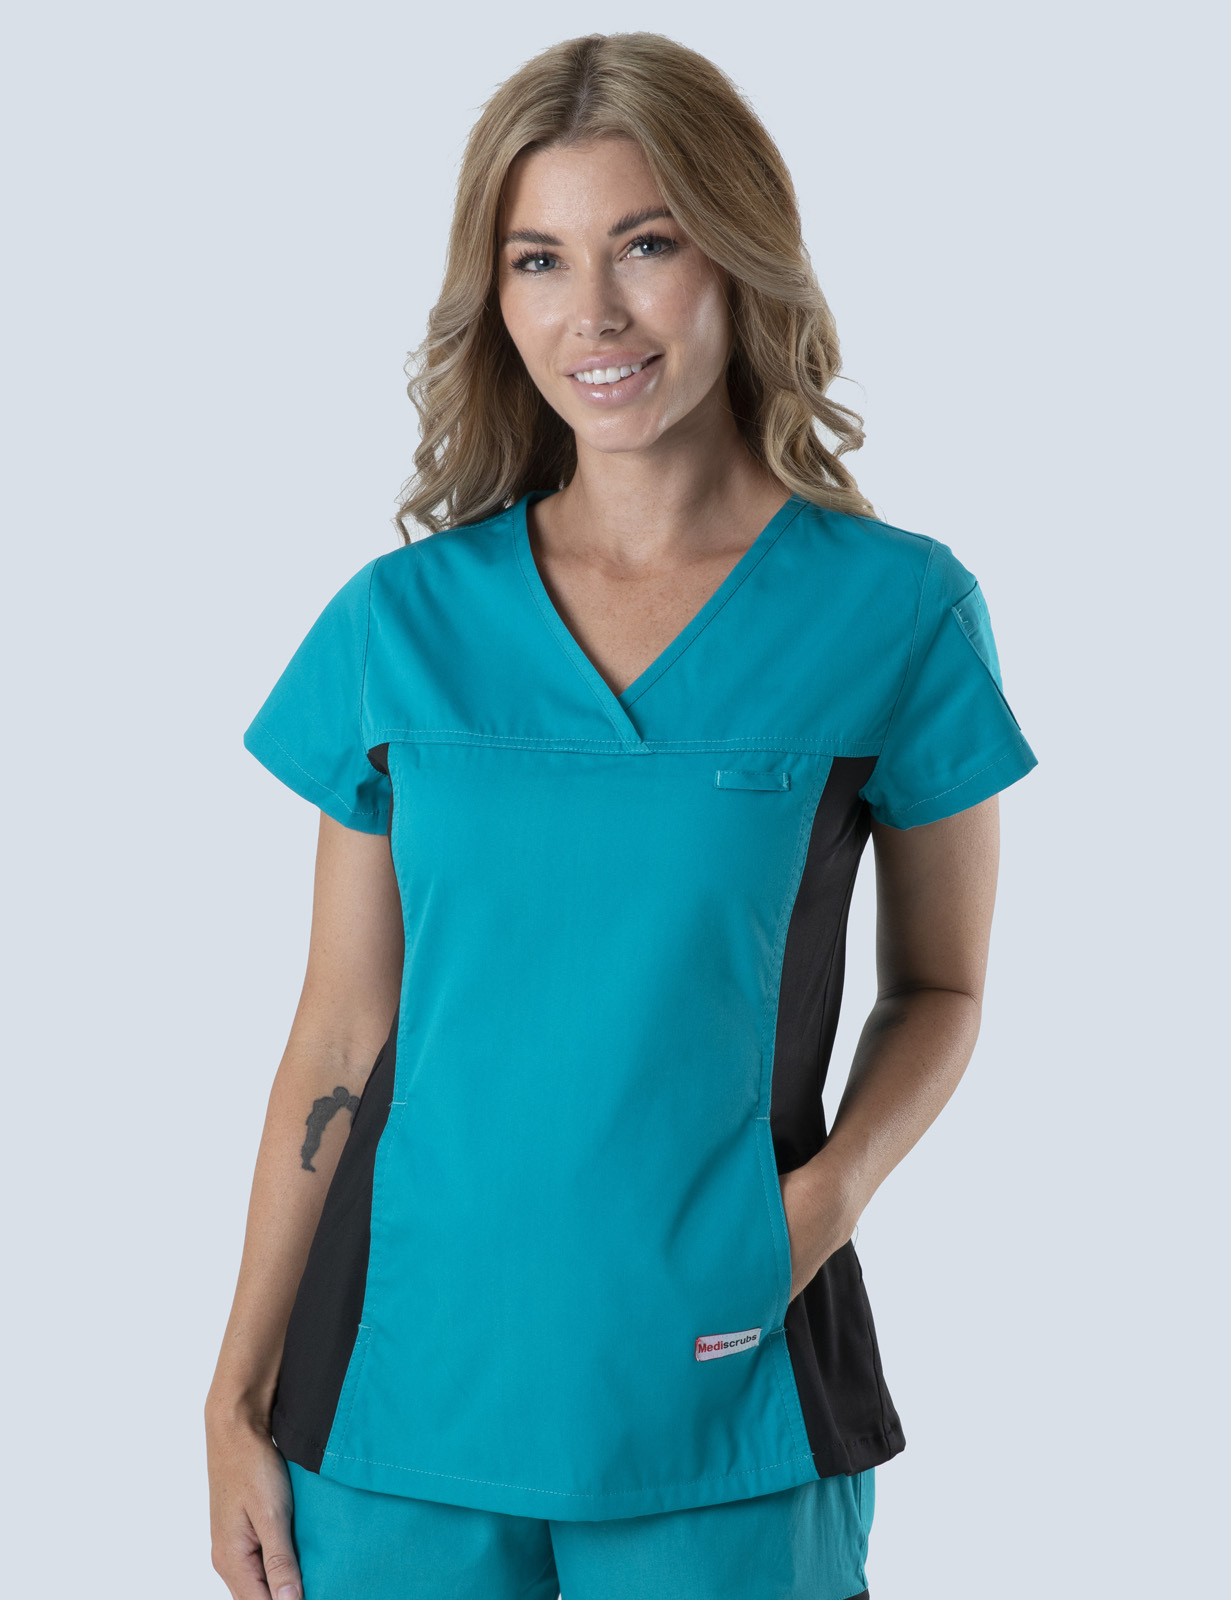 Gladstone Hospital - Paeds Unit (Women's Fit Spandex Scrub Top in Teal incl Logos)